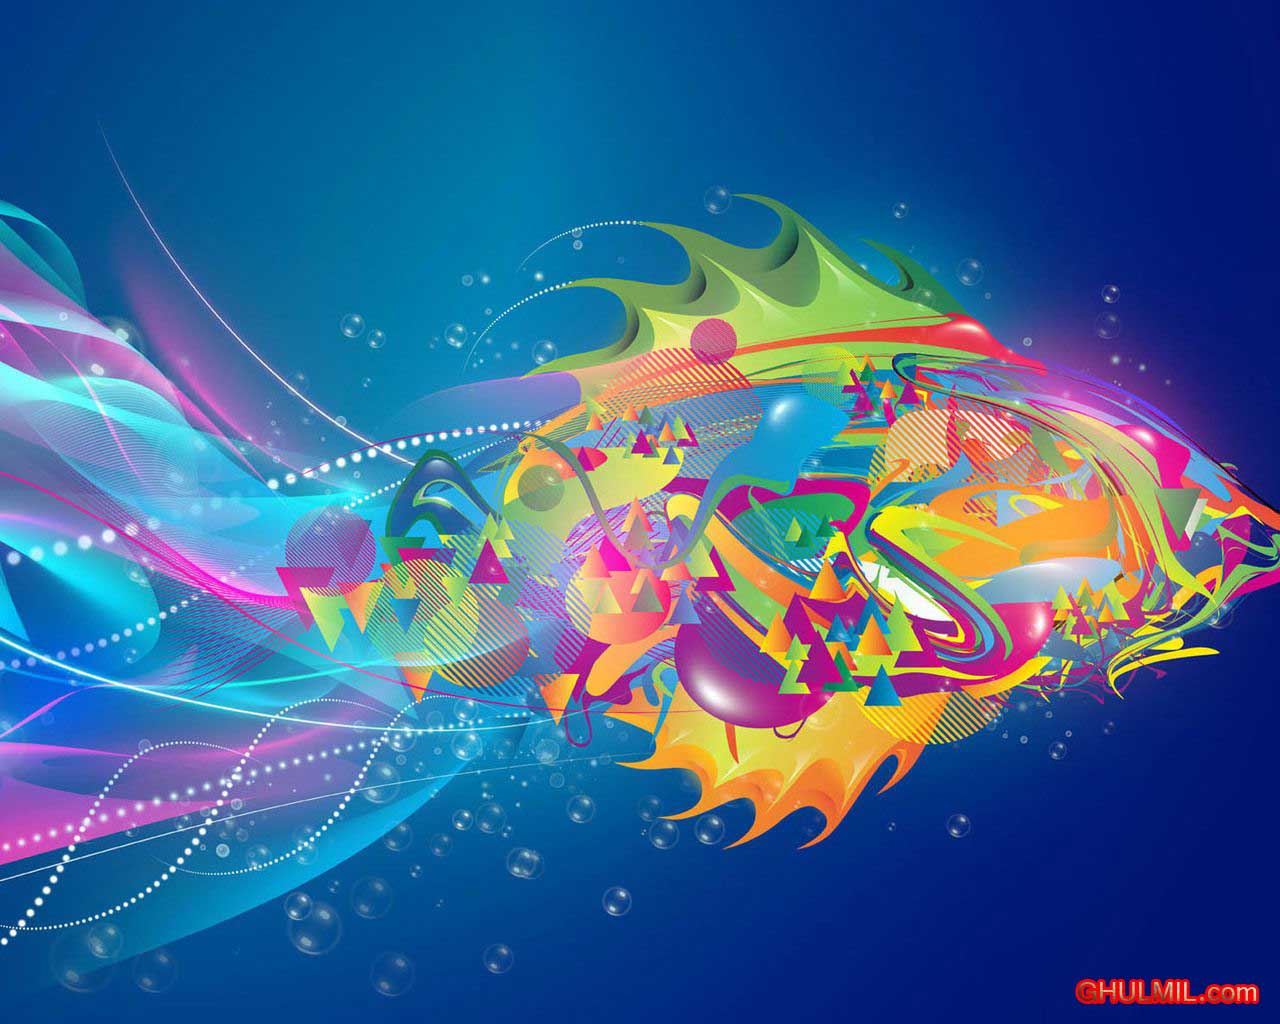 Cool 3d Pictures HD Wallpaper In Imageci